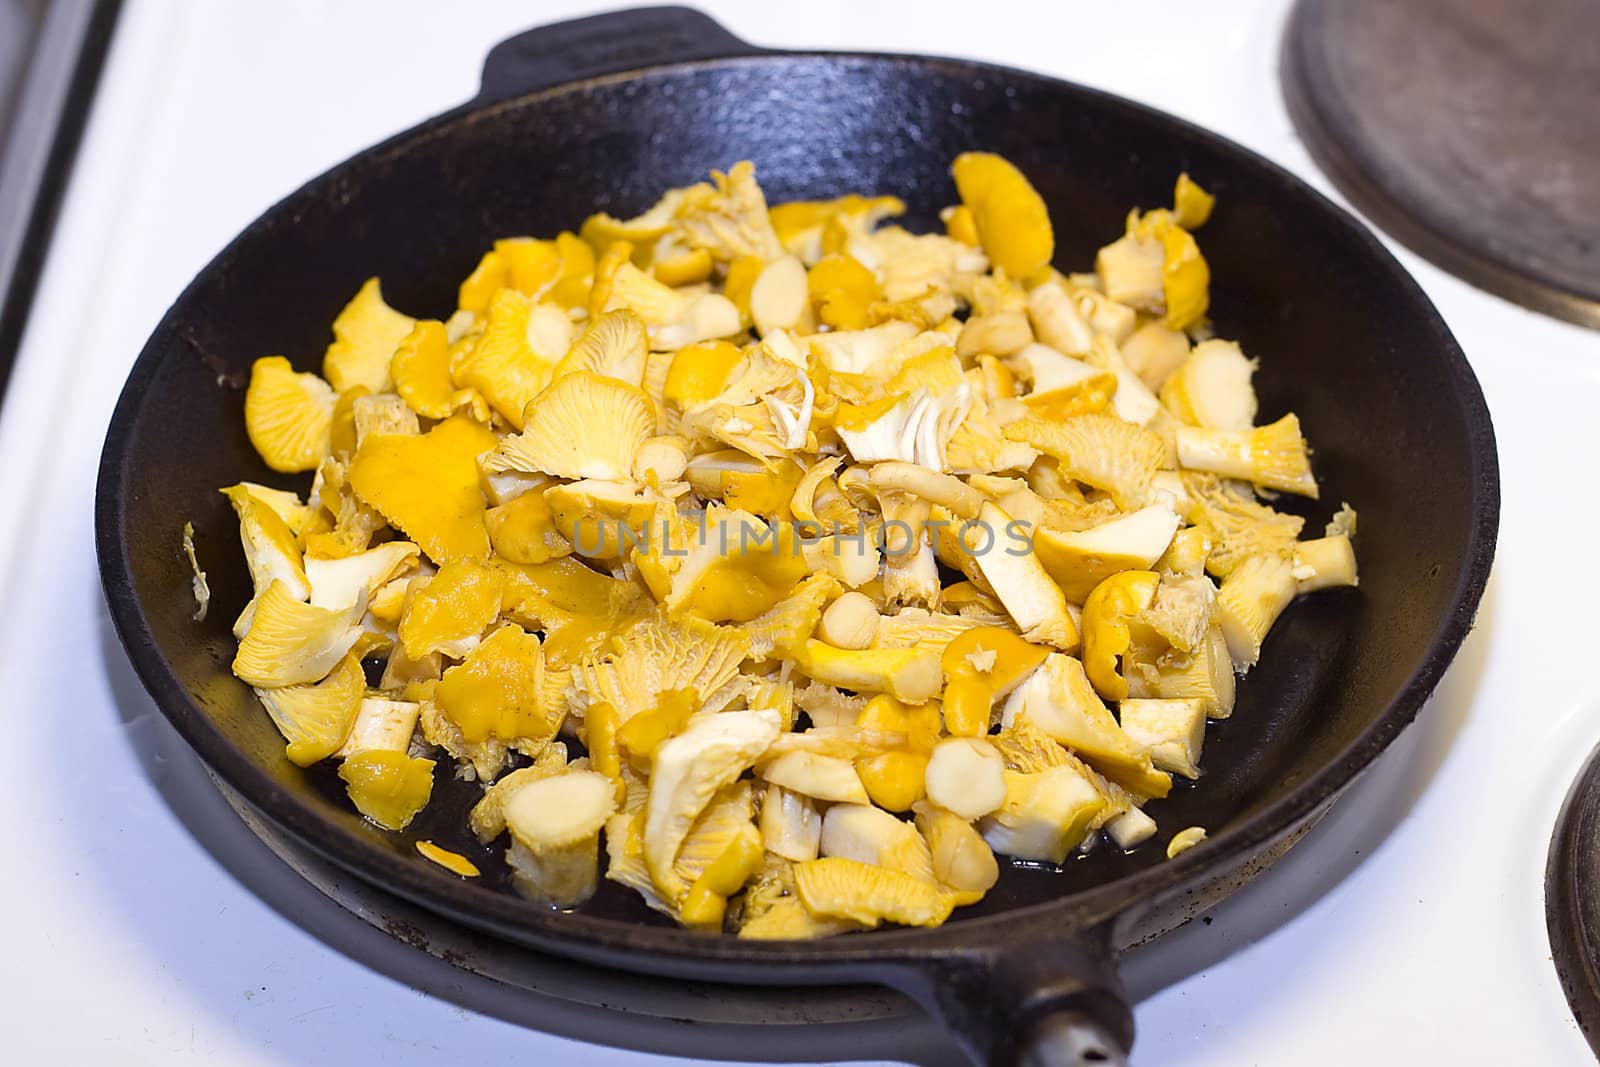 Chopped yellow chanterelles being fried on a cooker